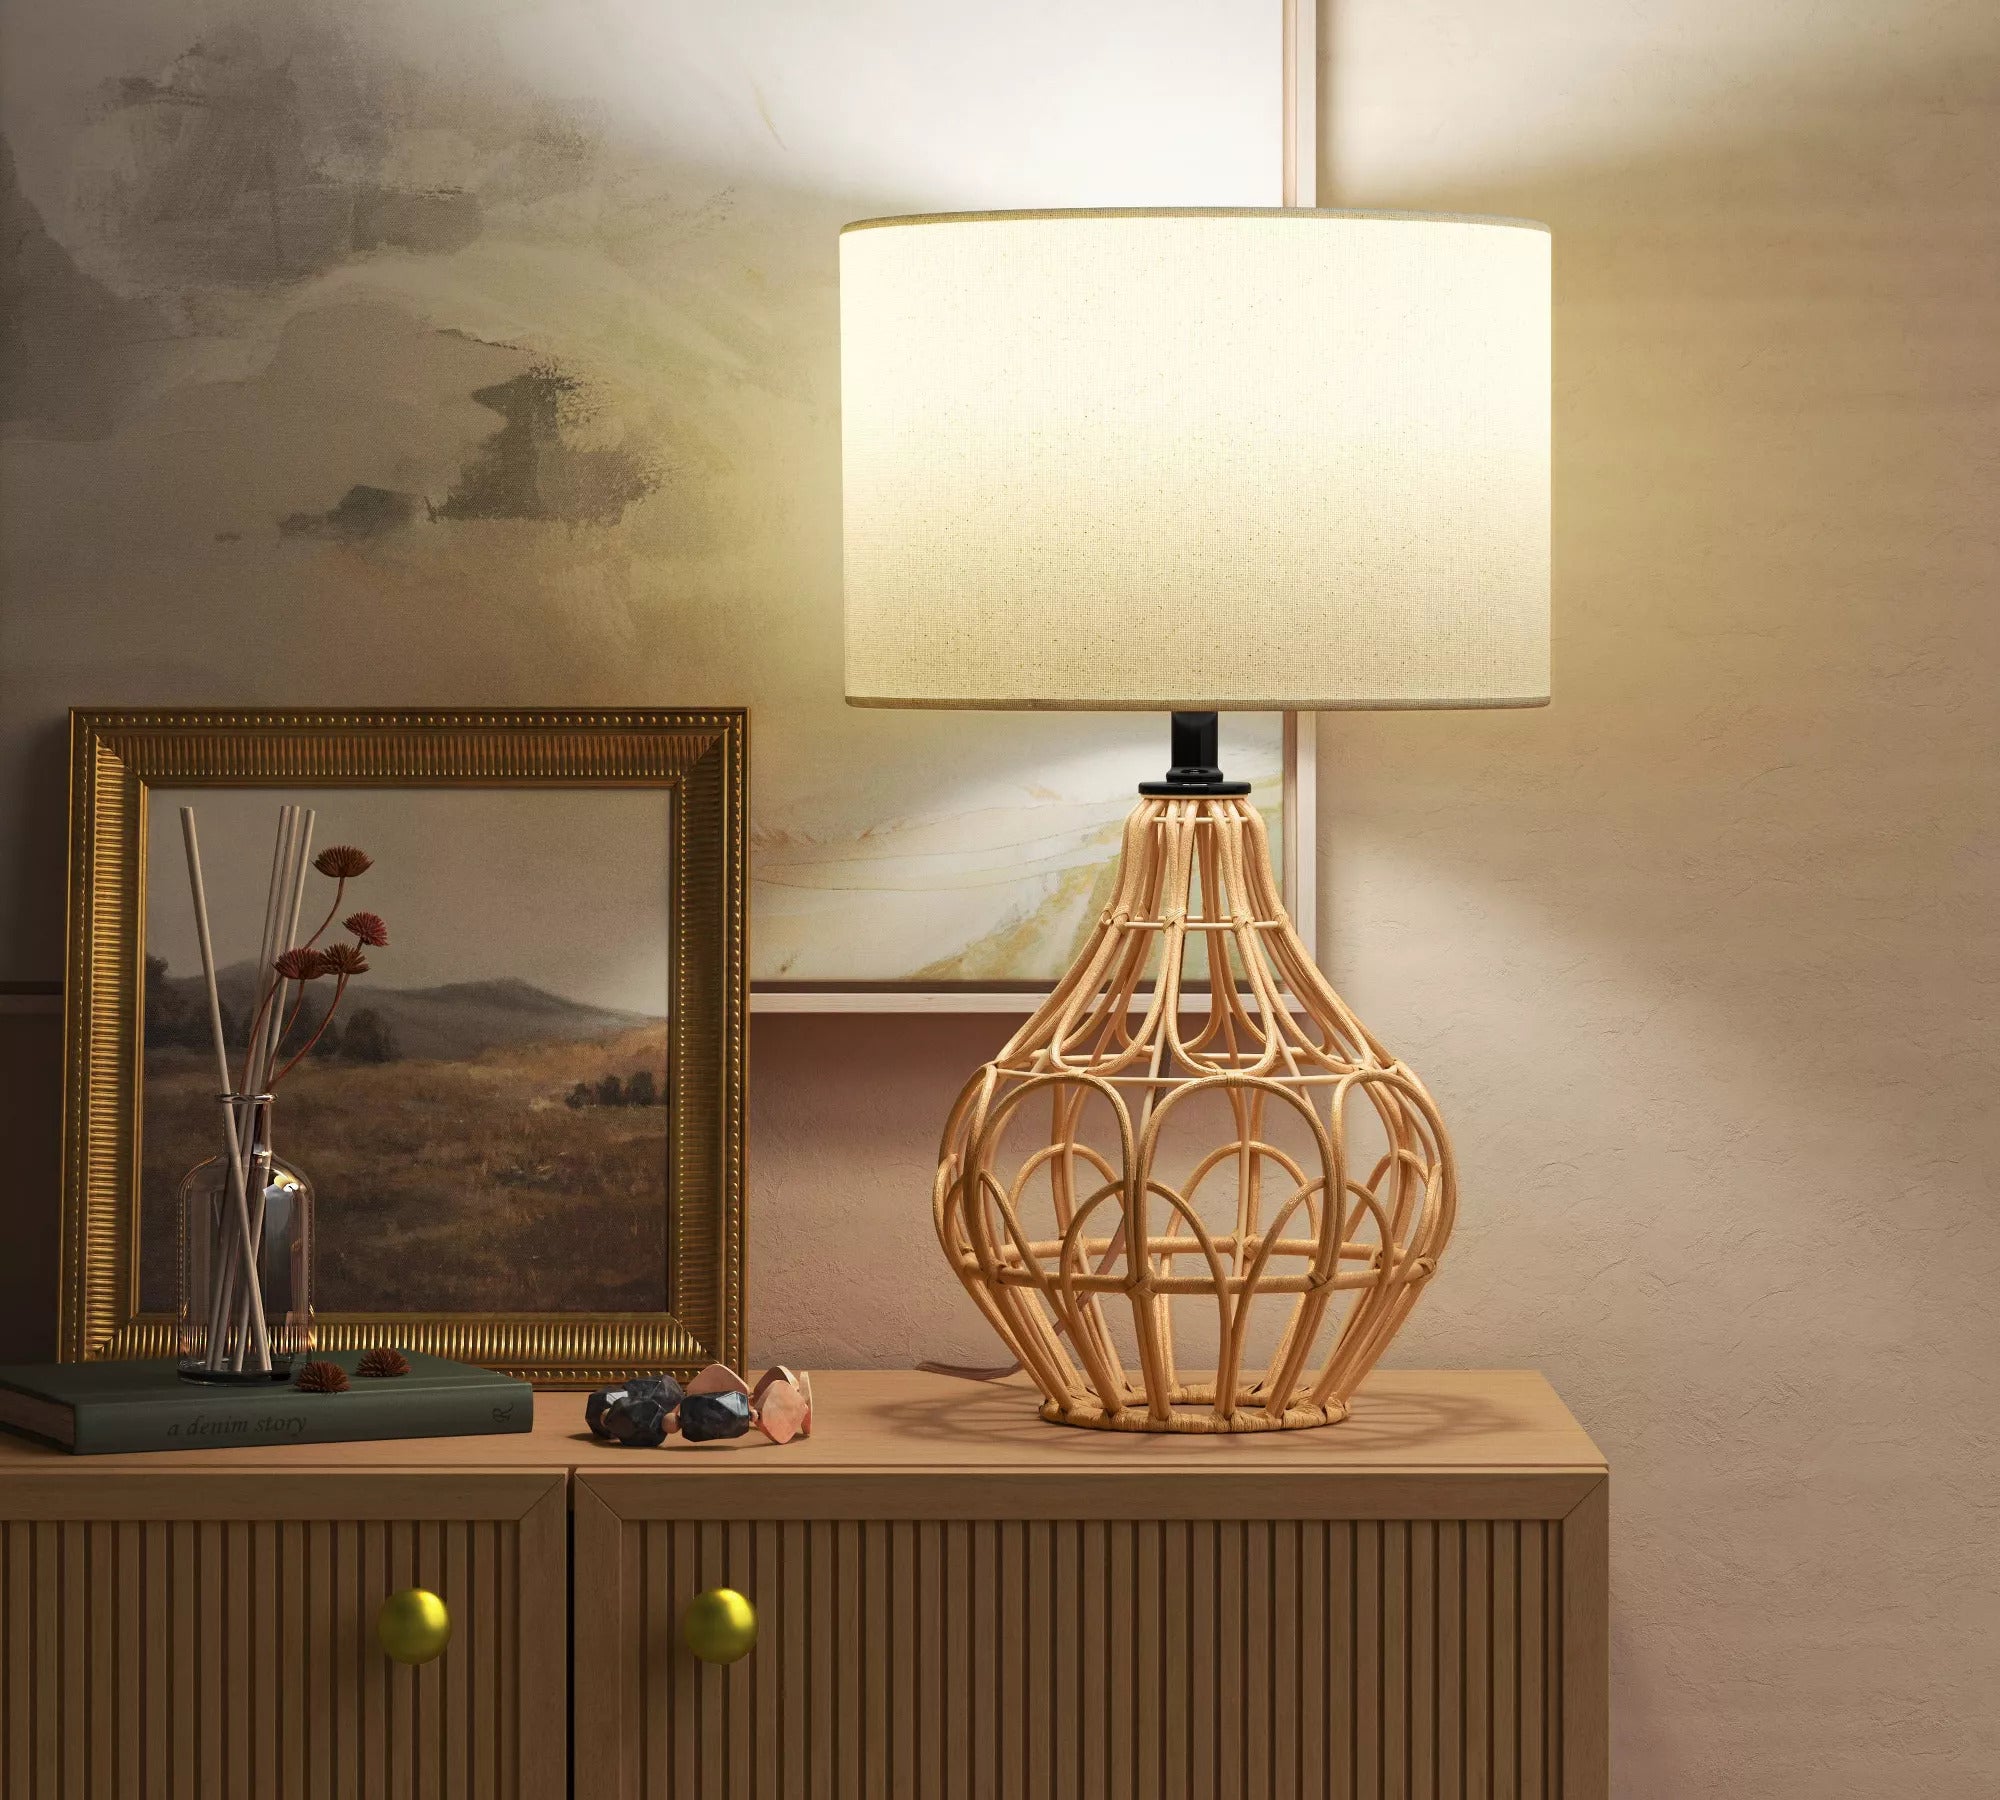 The lamp featuring a tan rattan base and a cream fabric shade